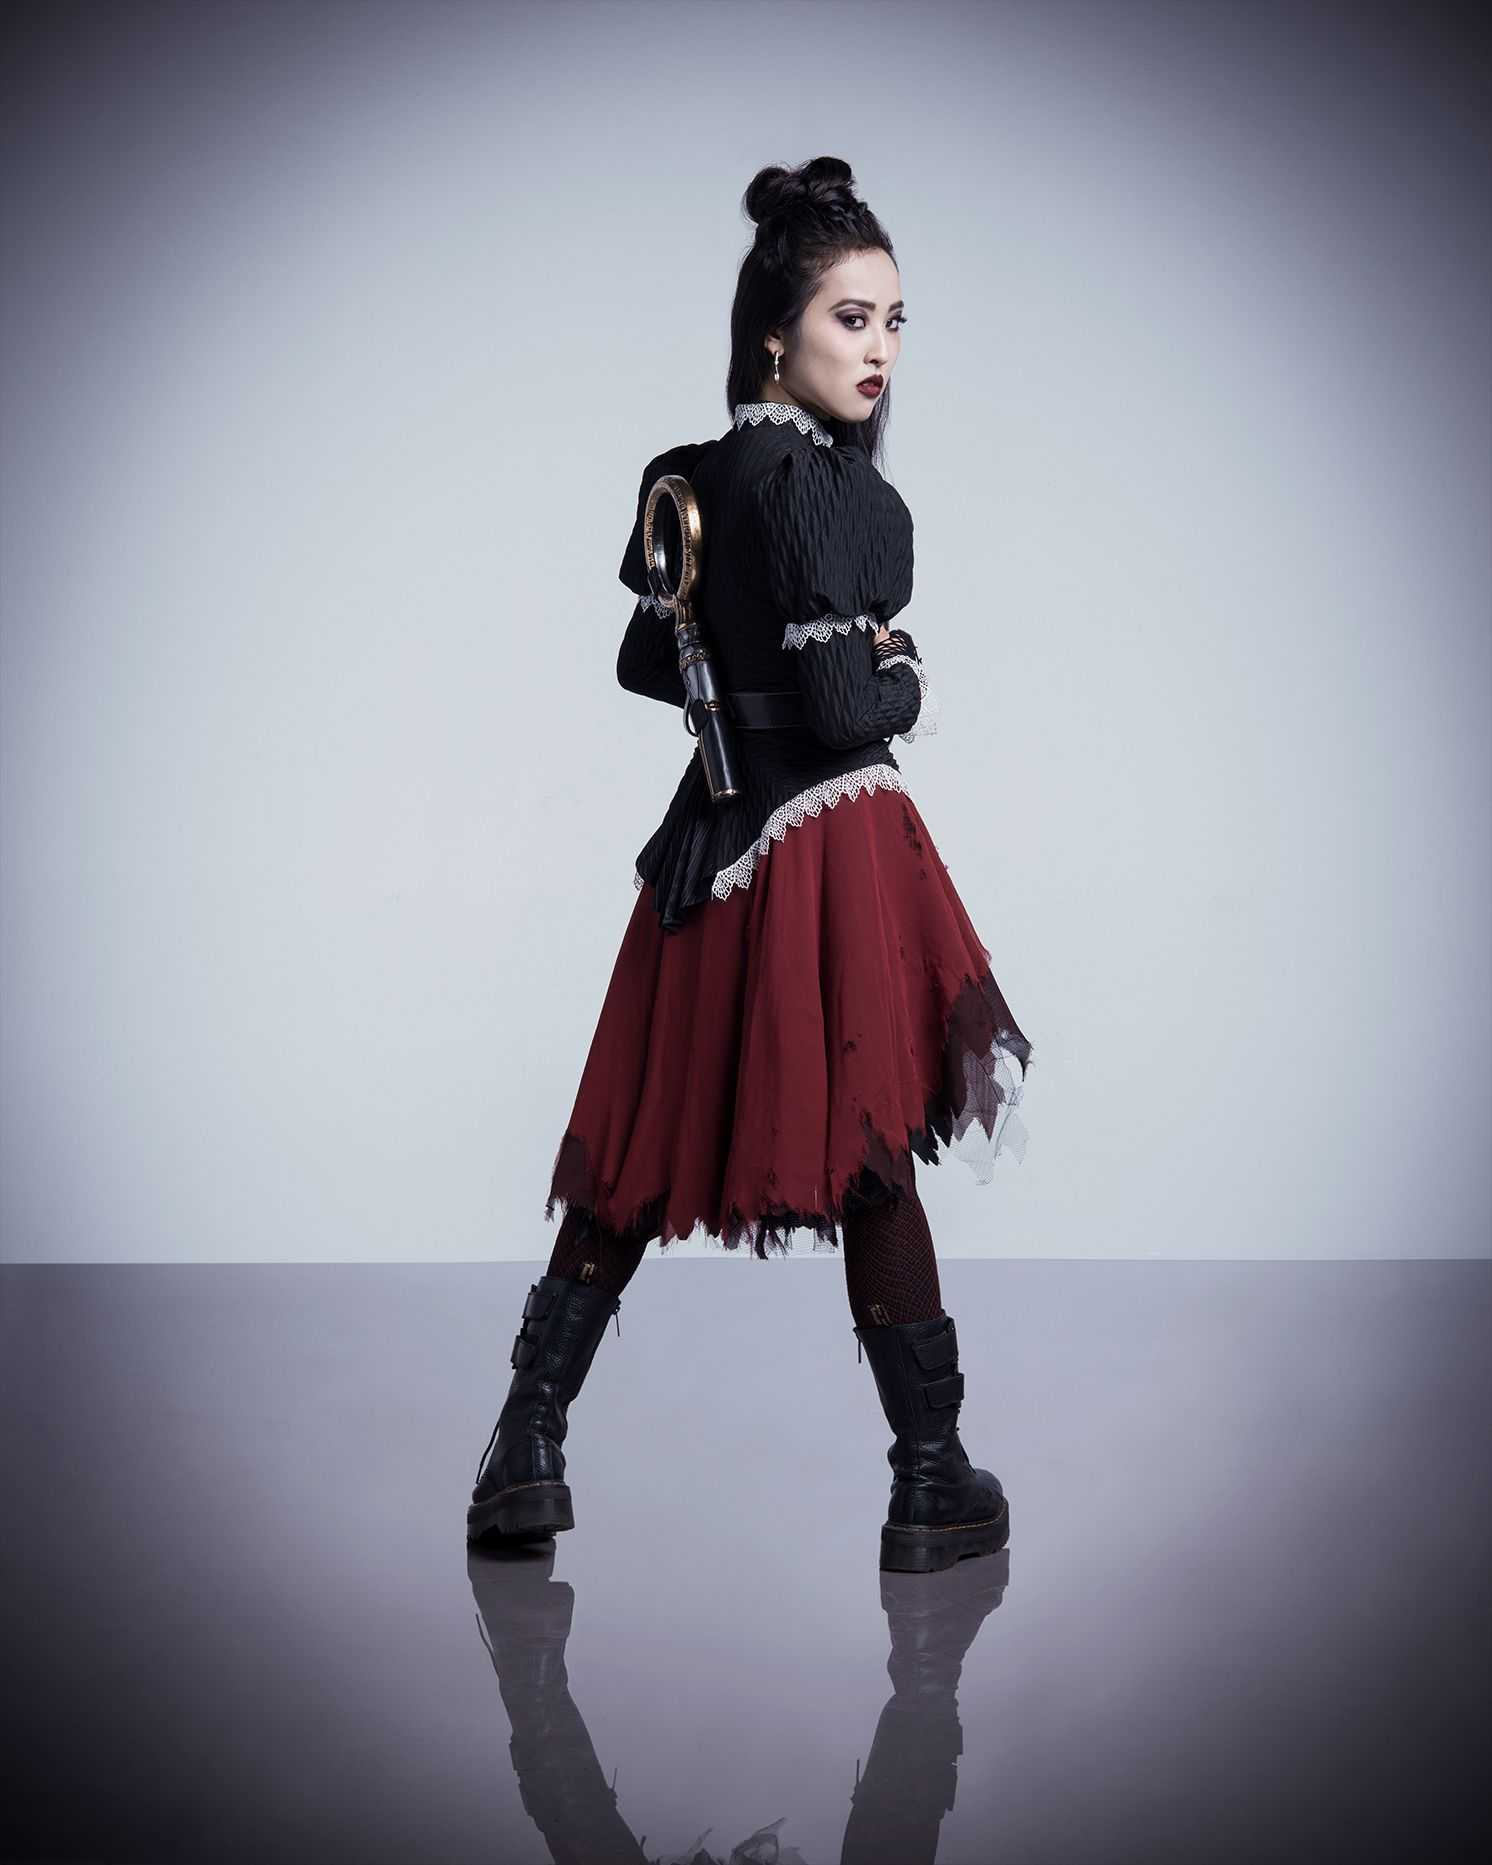 41 Hot Pictures Of Nico Minoru That Will Make You Begin To Look All Starry Eyed At Her 40